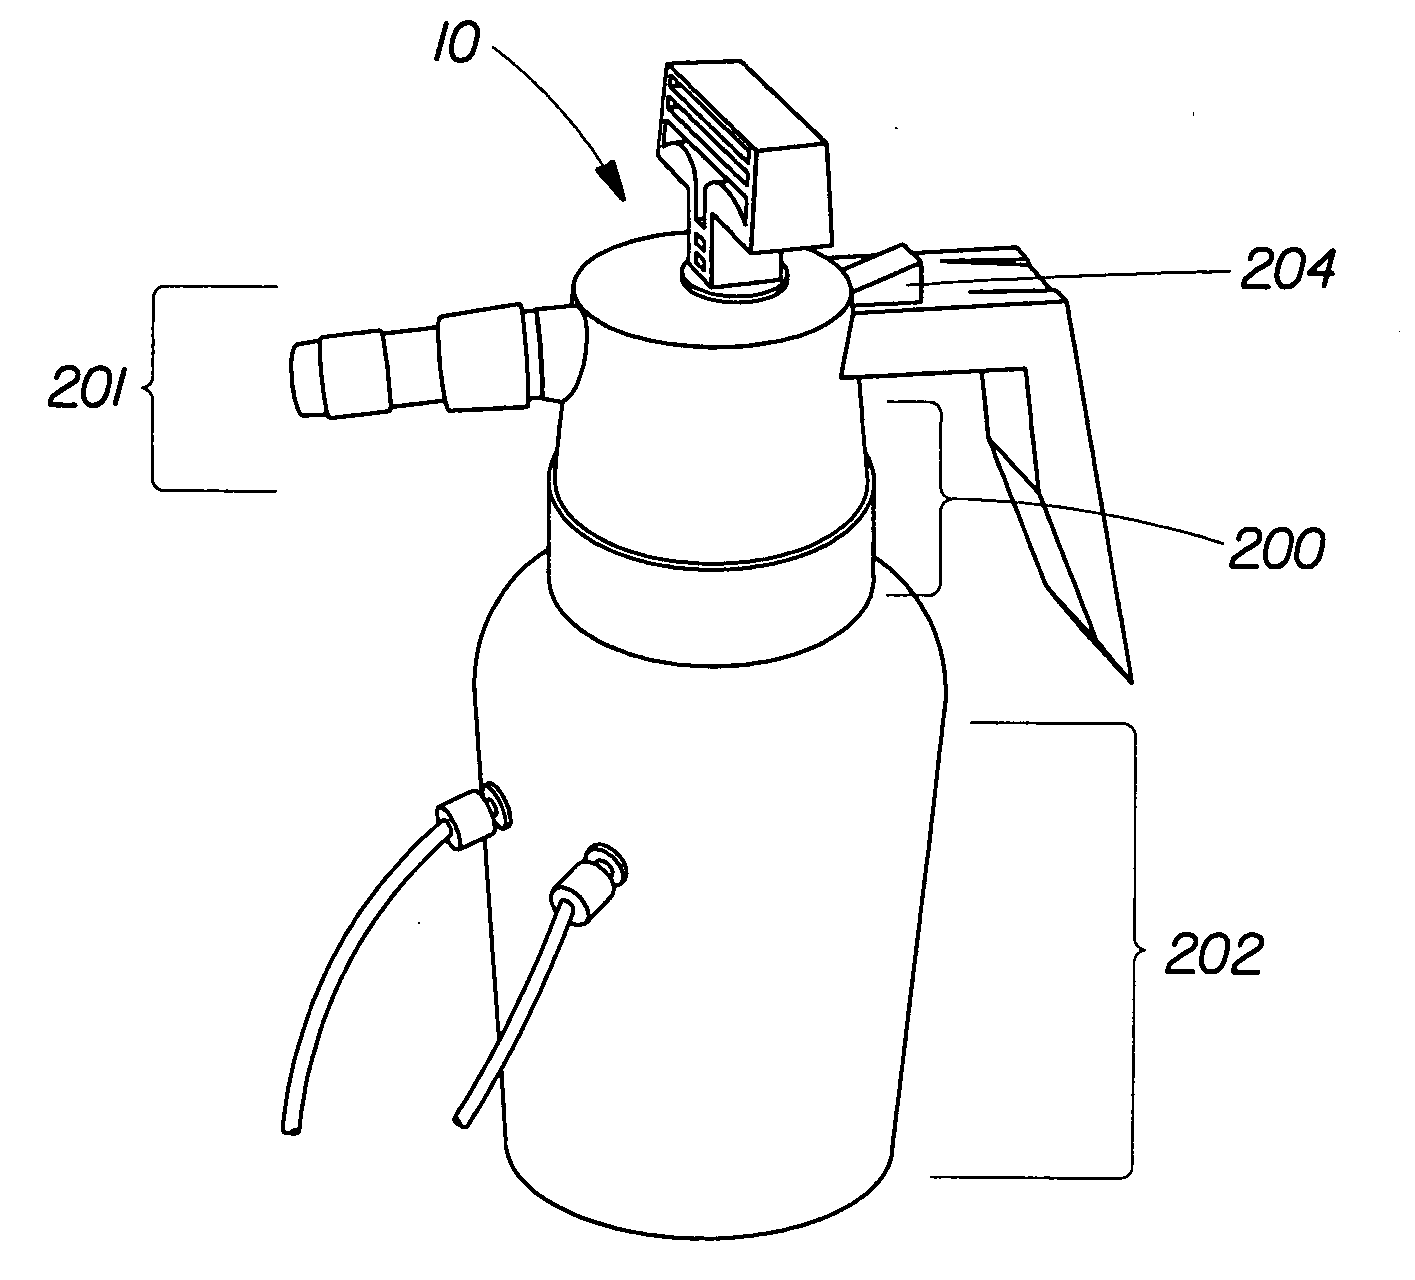 Portable bio-chemical decontaminant system and method of using the same